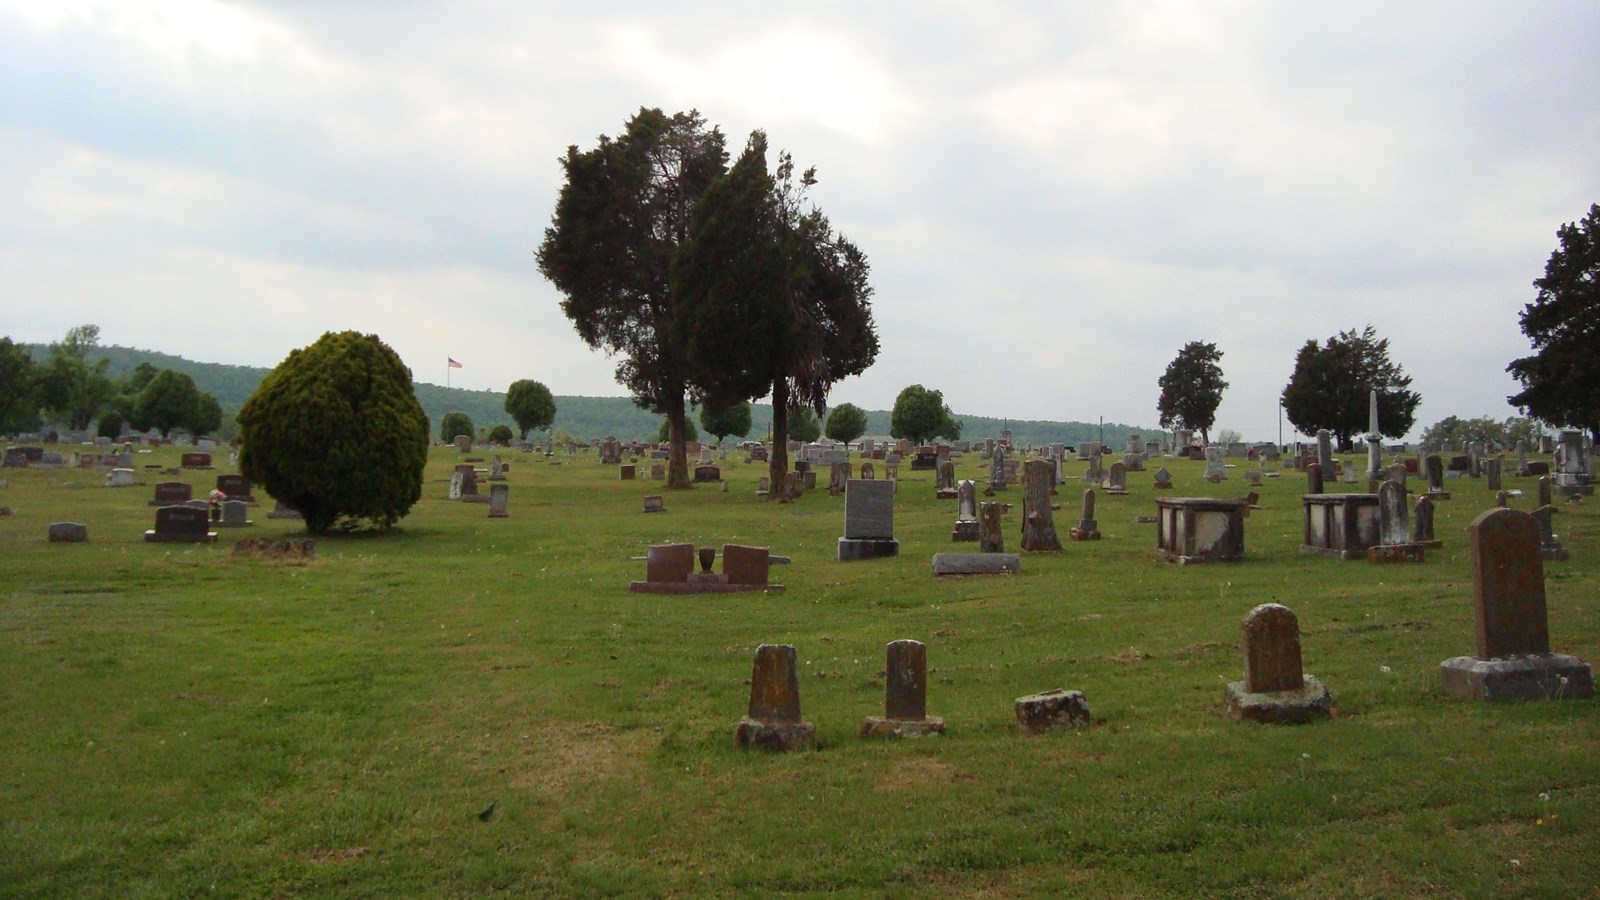 An expansive view of a flat, grassy cemetery dotted with headstones and a few deciduous trees.